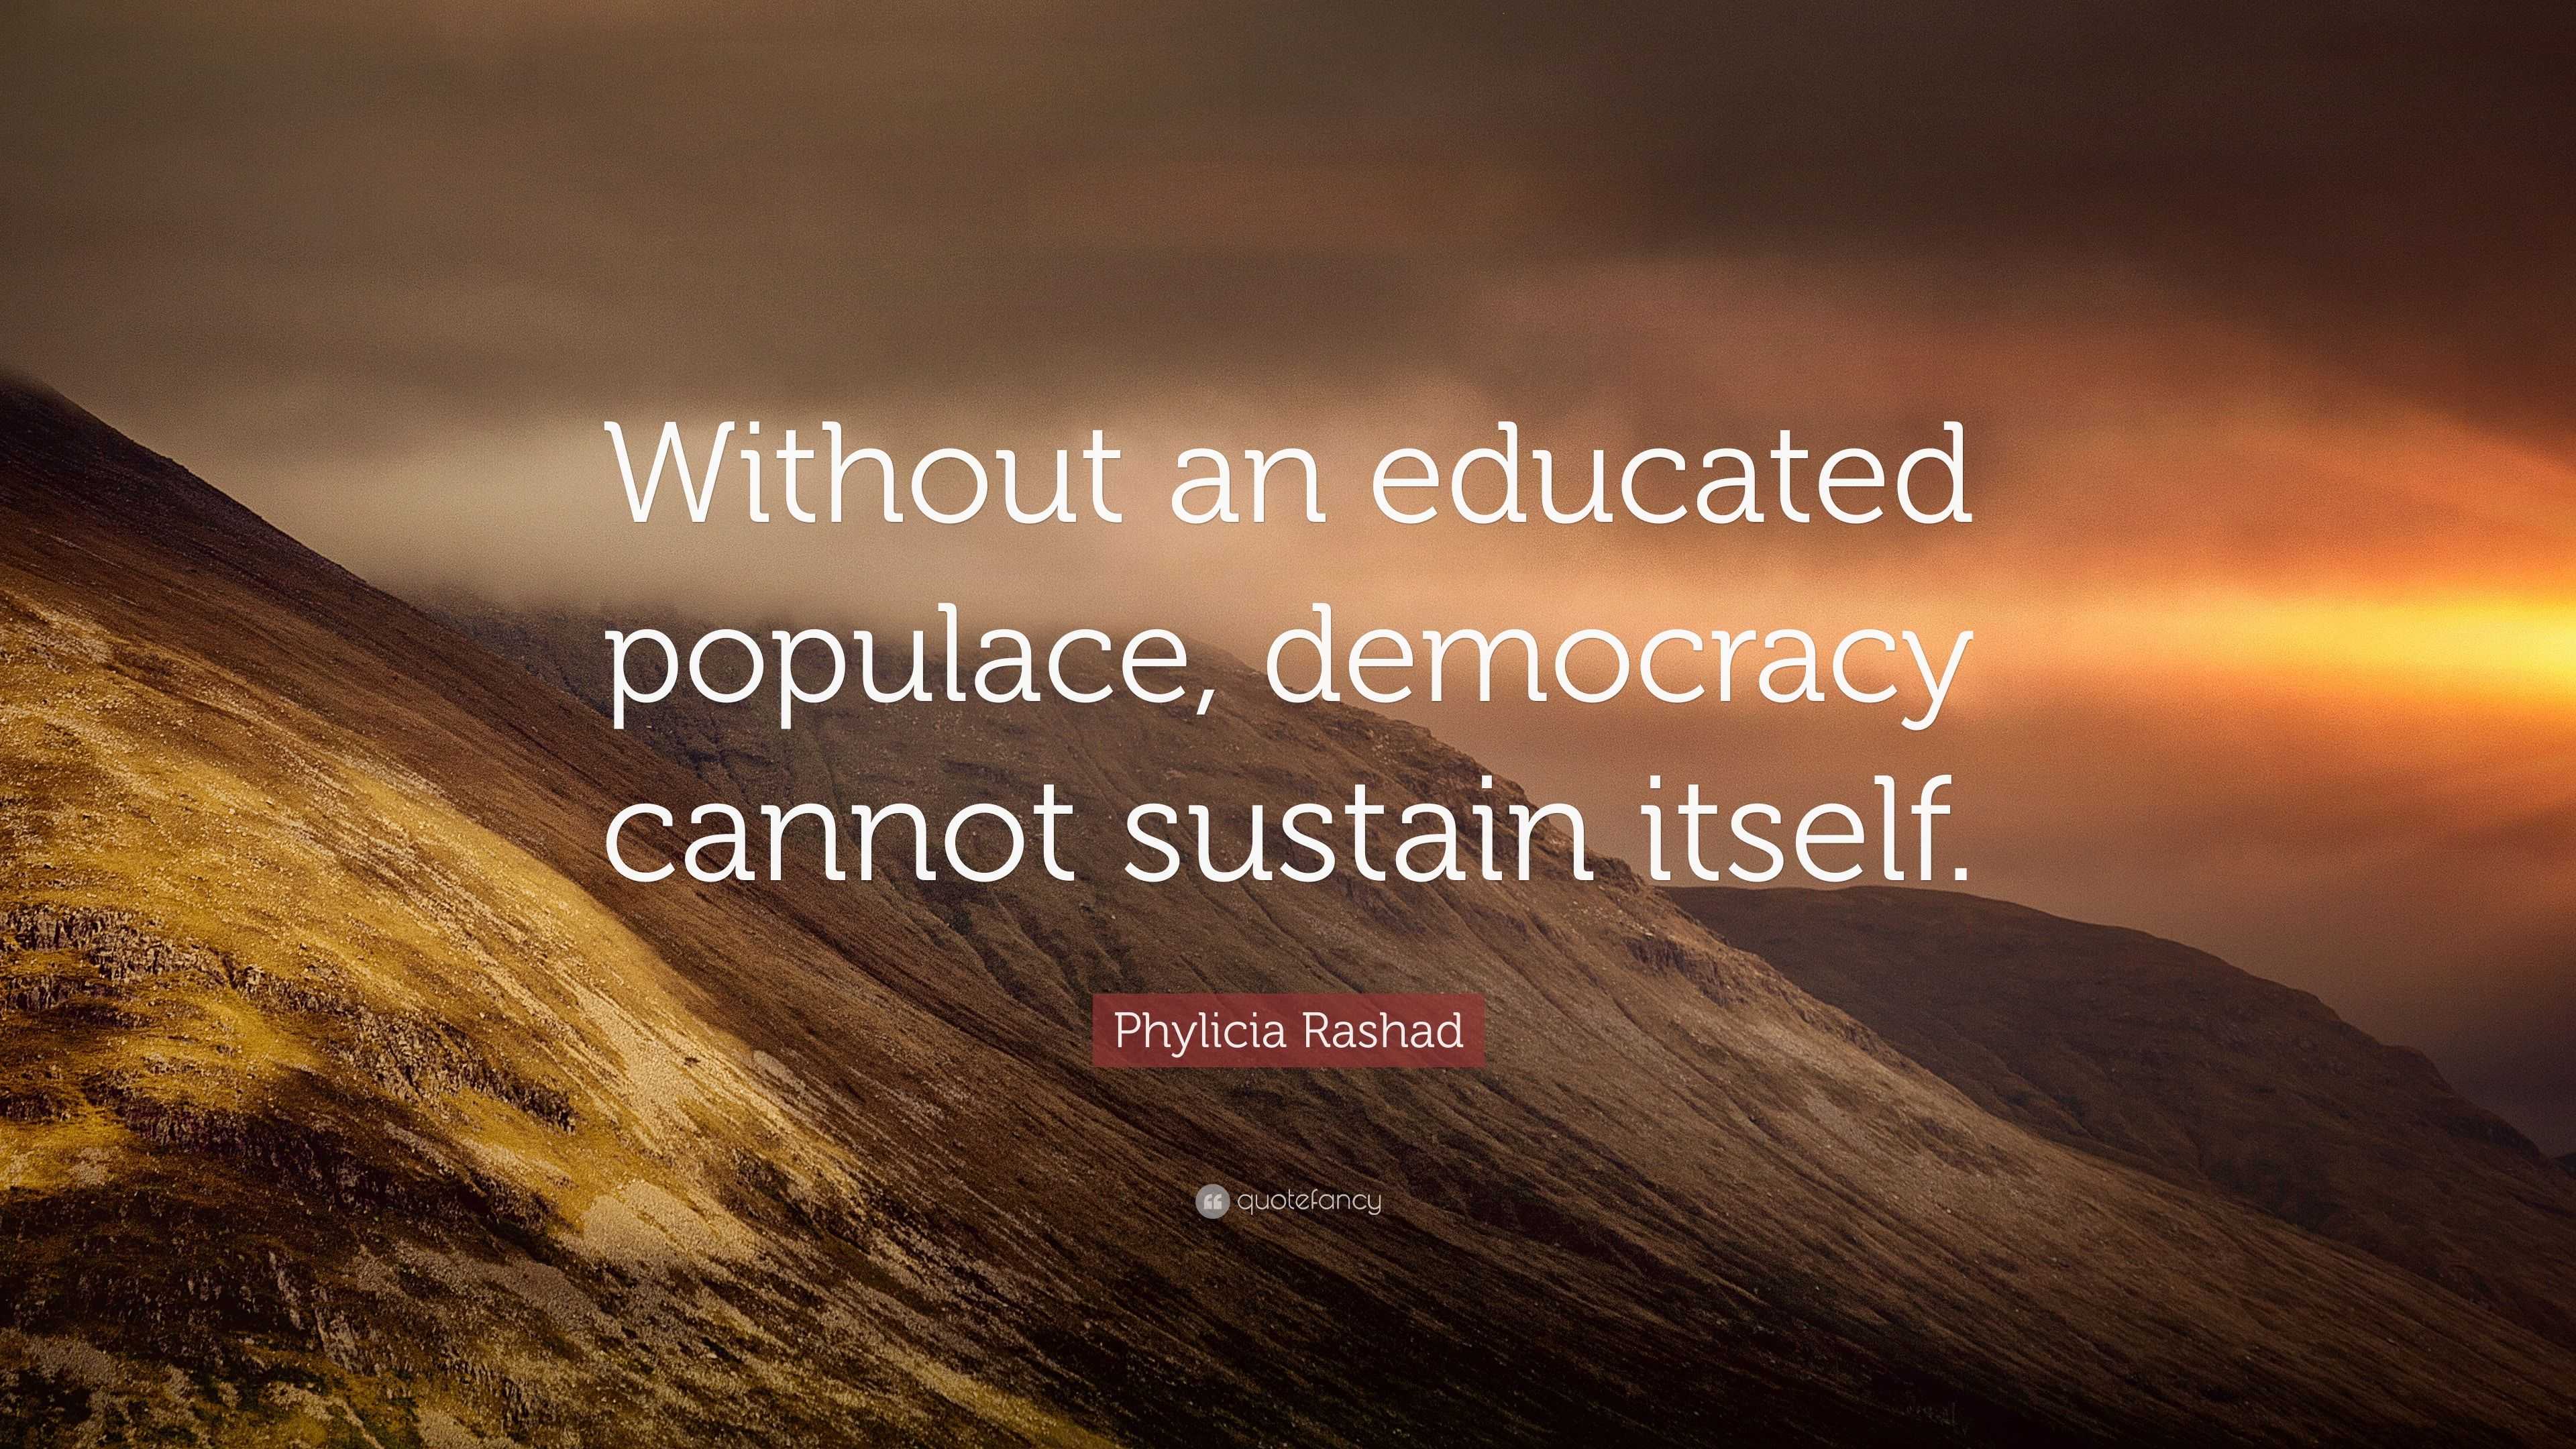 democracy cannot survive without education essay for or against